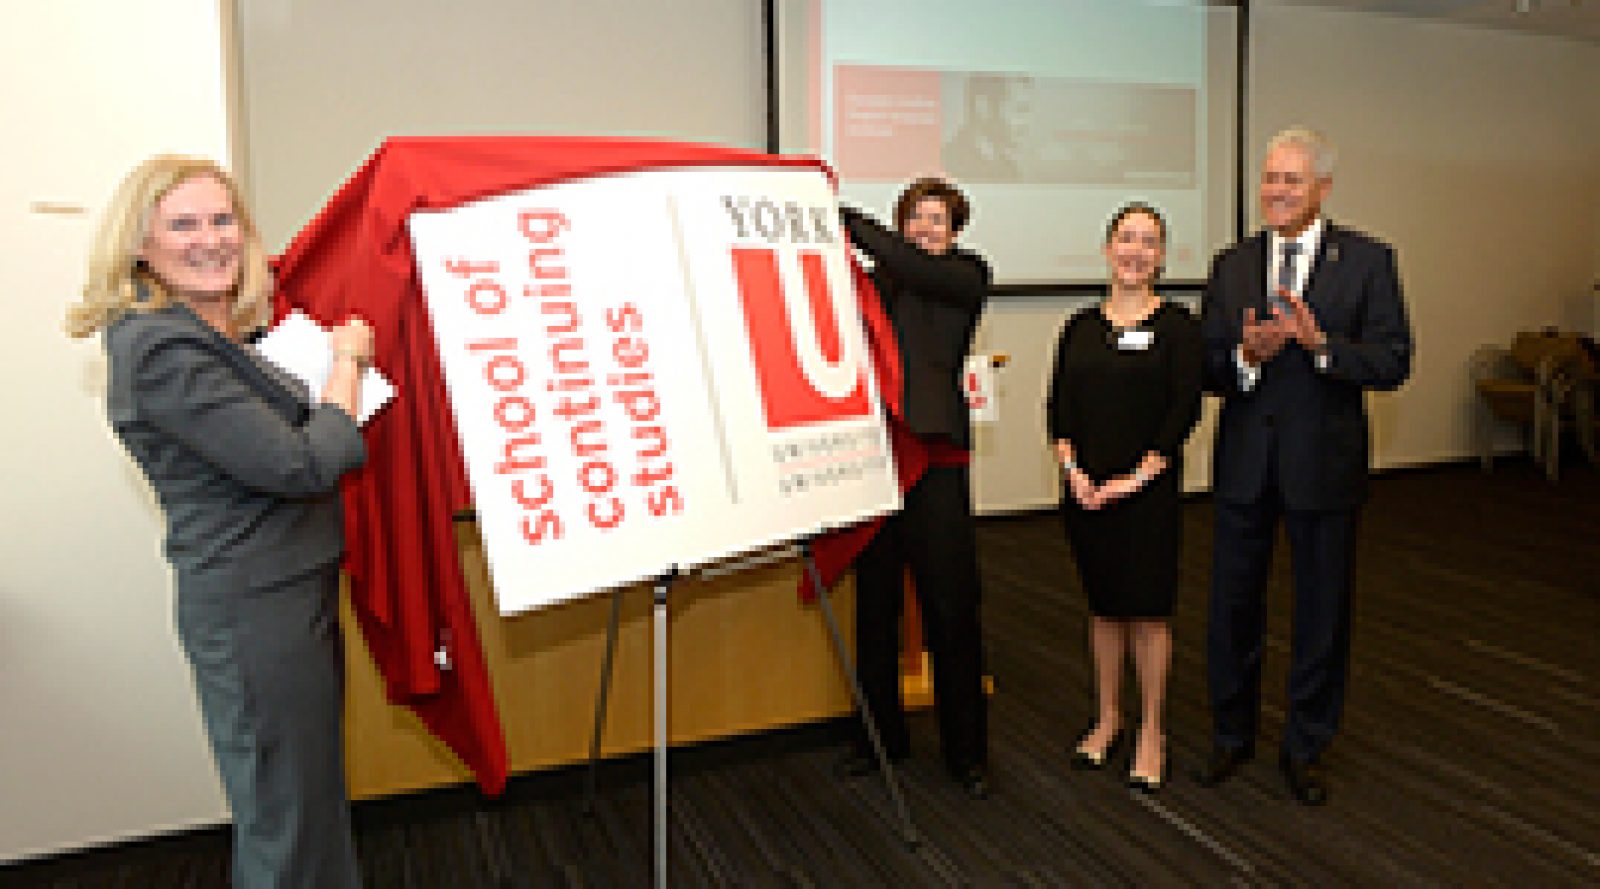 Vice president-academic and provost Rhonda Lenton, left, York University executive director-continuing and professional education Tracey Taylor-O’Reilly, student Sabrina Agricola and president and vice-chancellor Mamdouh Shoukri help launch the York University School of Continuing Studies